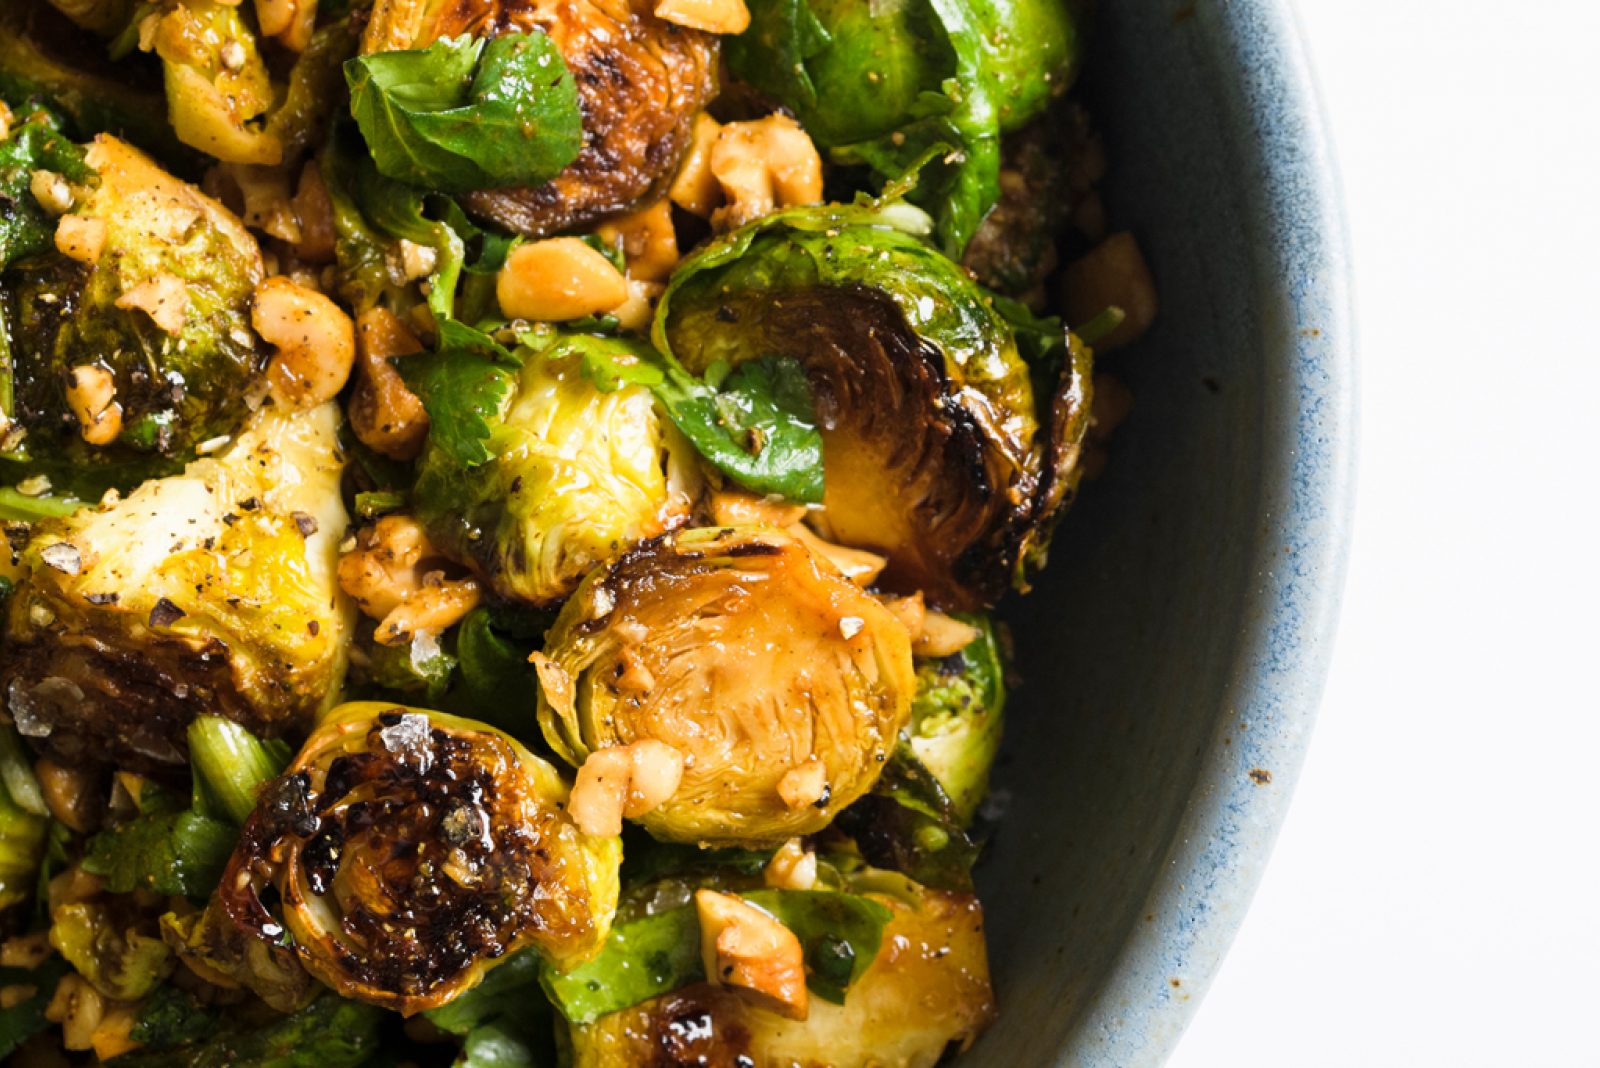 coriander-cashew-skillet-charred-brussels-sprouts-cookish web